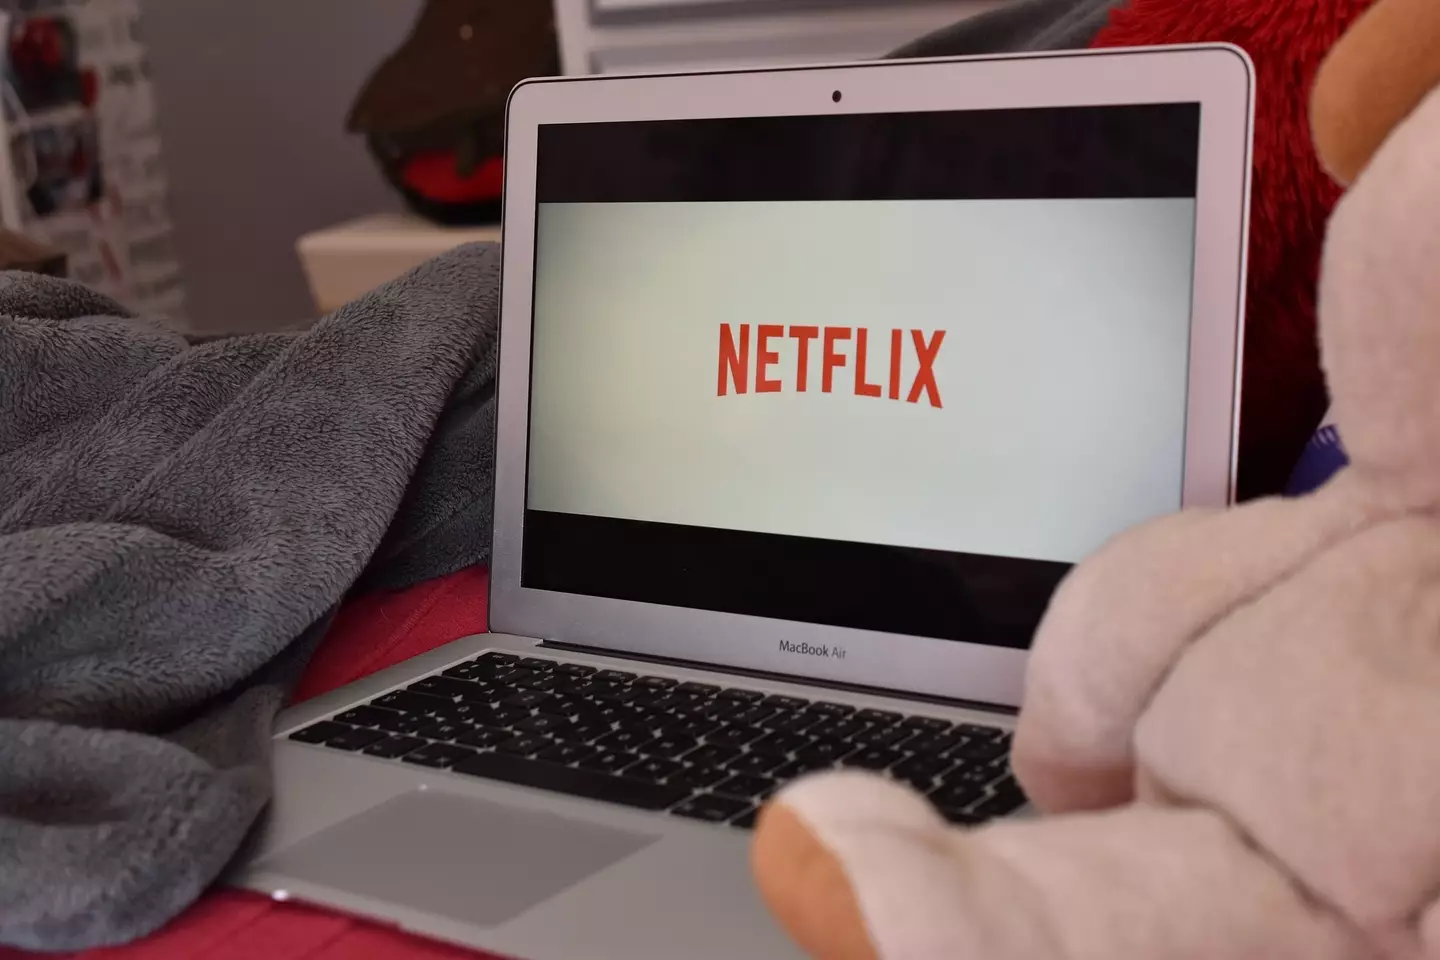 You might not be able to fully benefit from your Netflix plan.